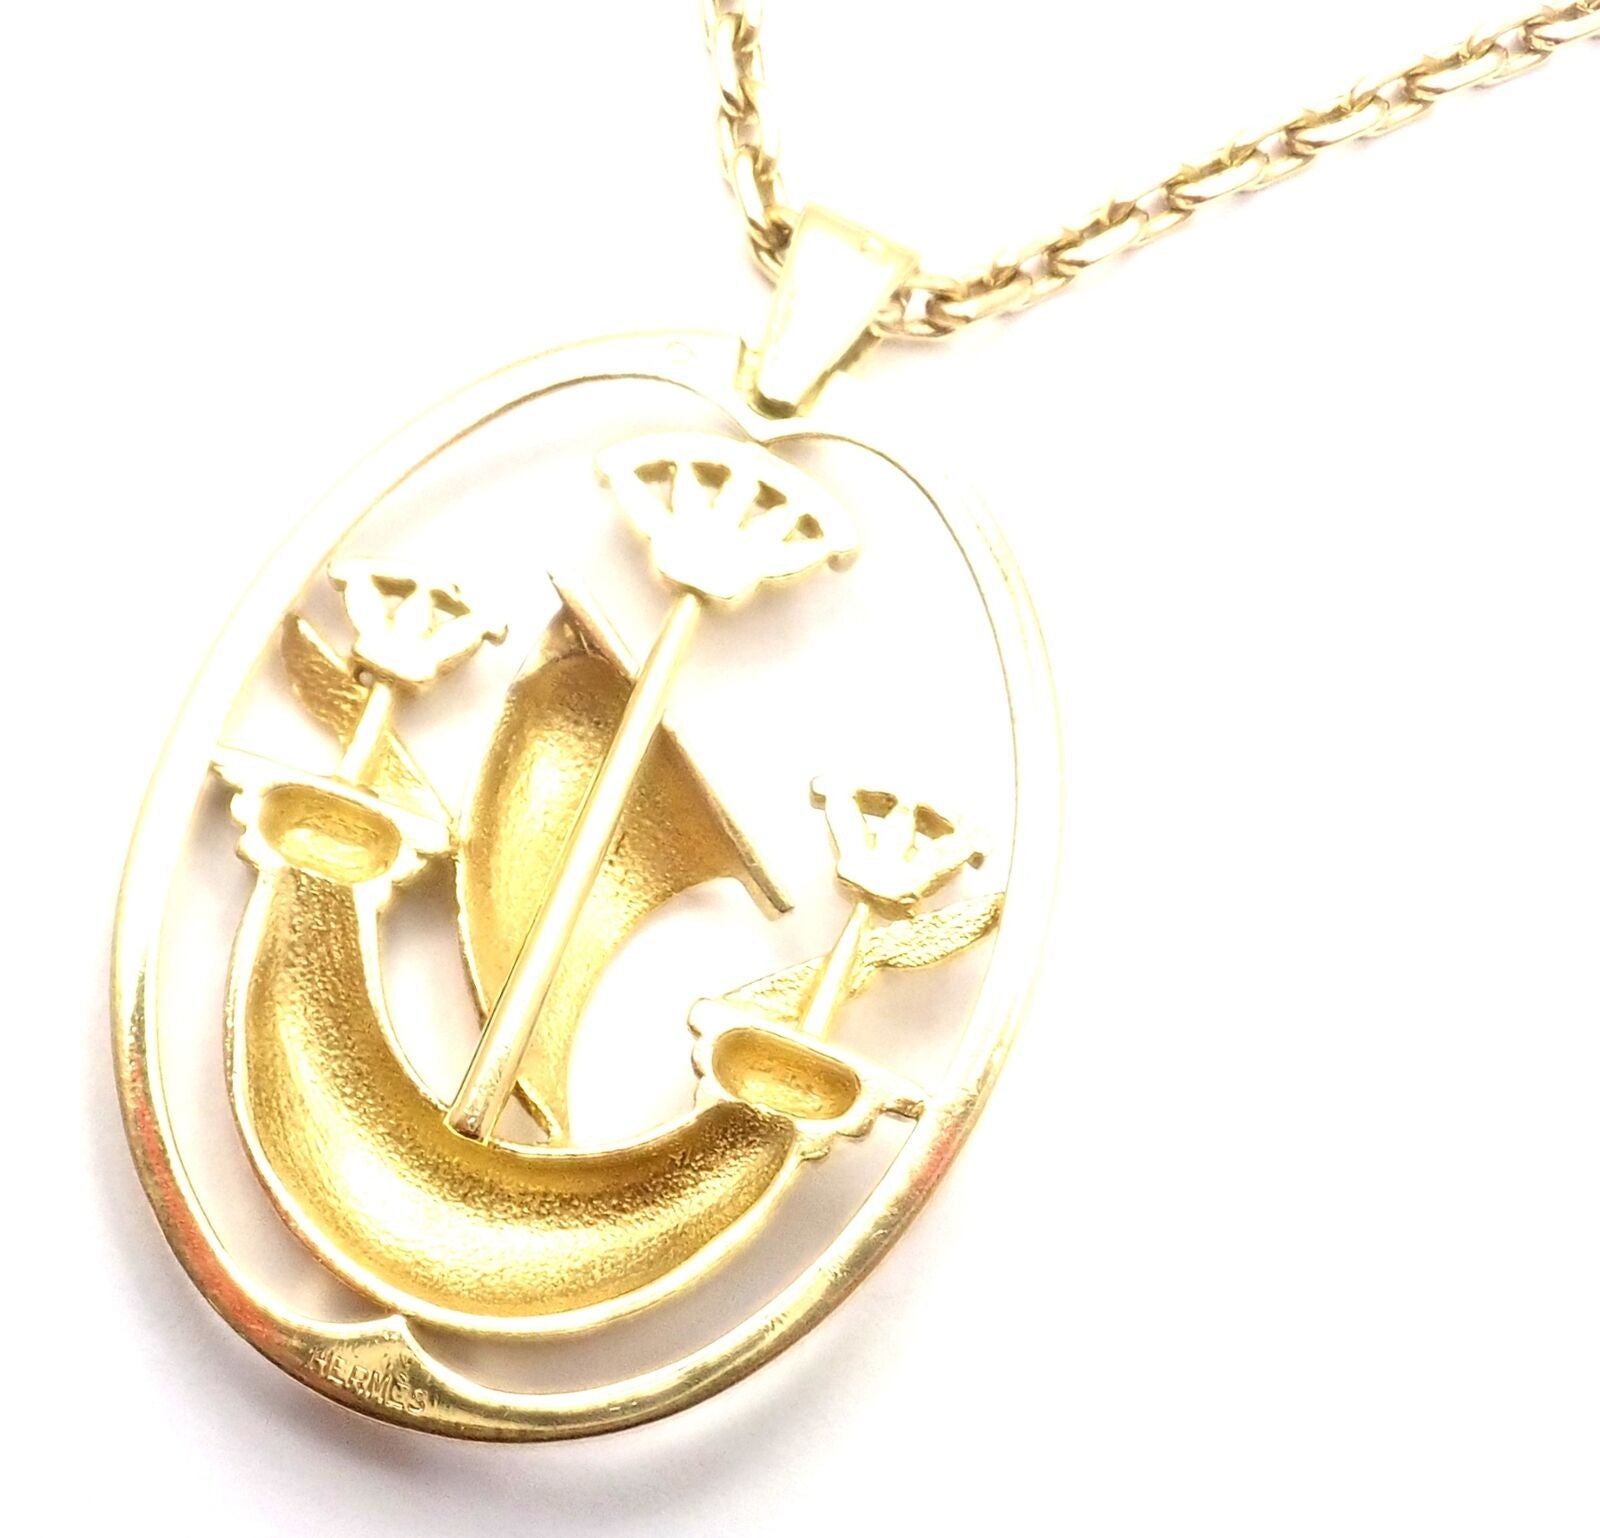 Hermes Jewelry & Watches:Fine Jewelry:Necklaces & Pendants Rare! Vintage Authentic Hermes 18k Yellow Gold Ship Pendant Necklace